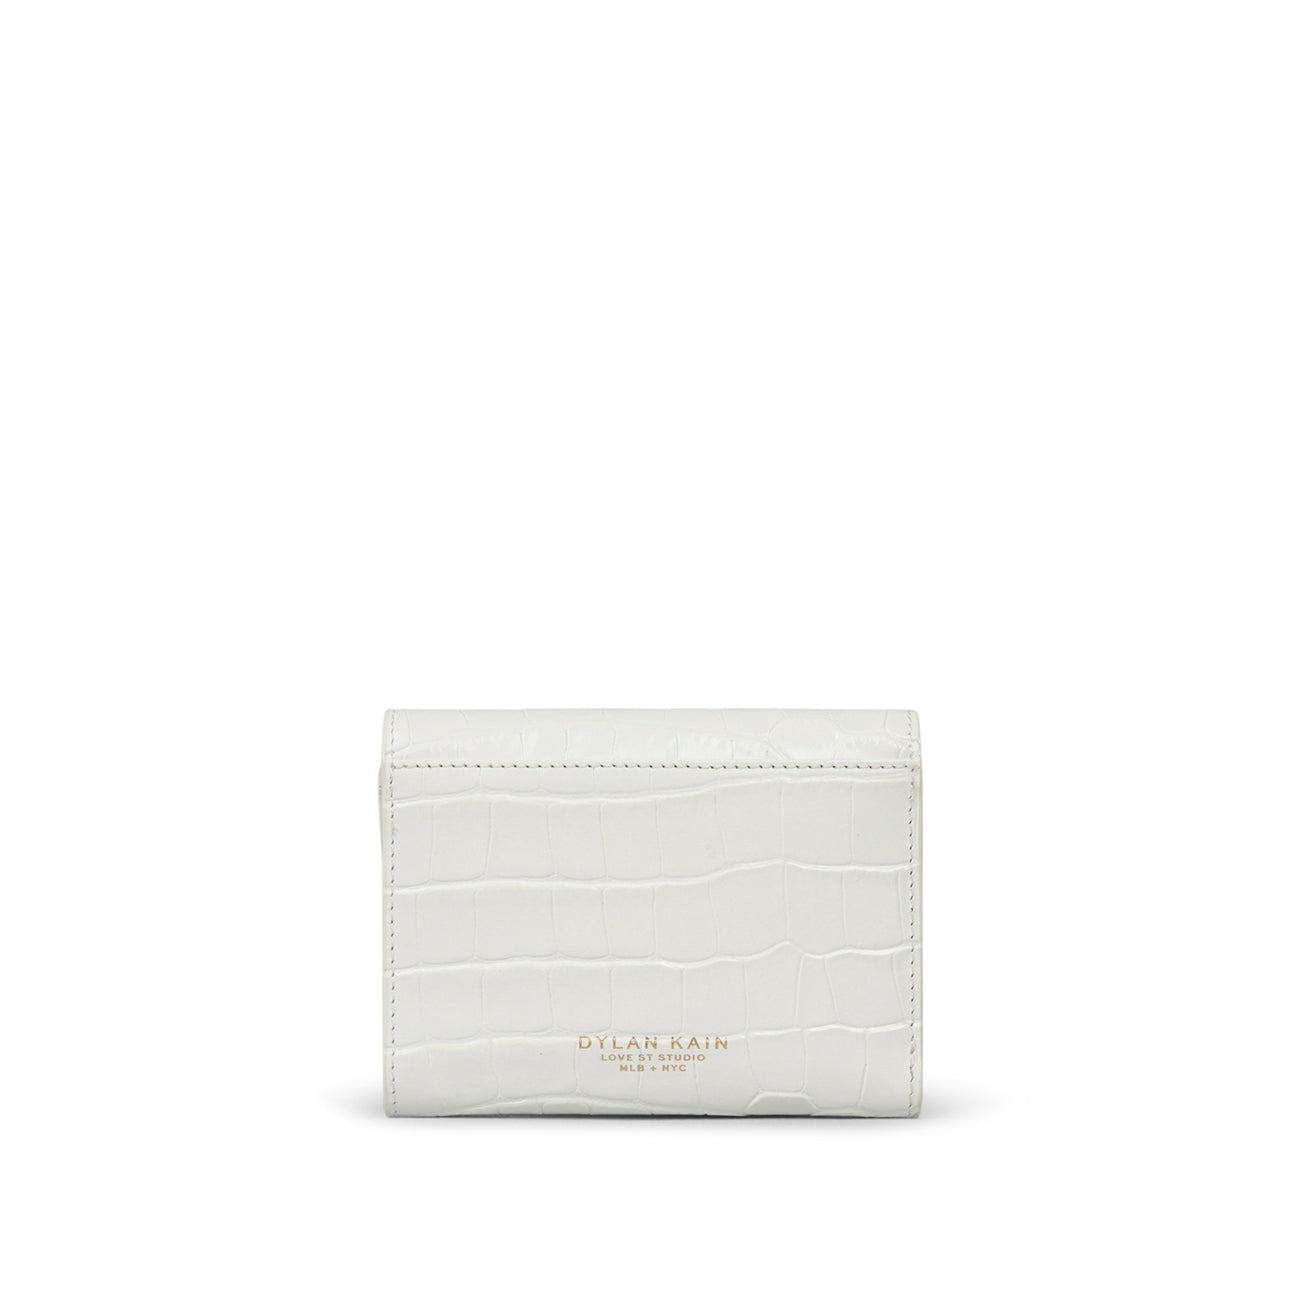 SAMPLE - The Helena Wallet White